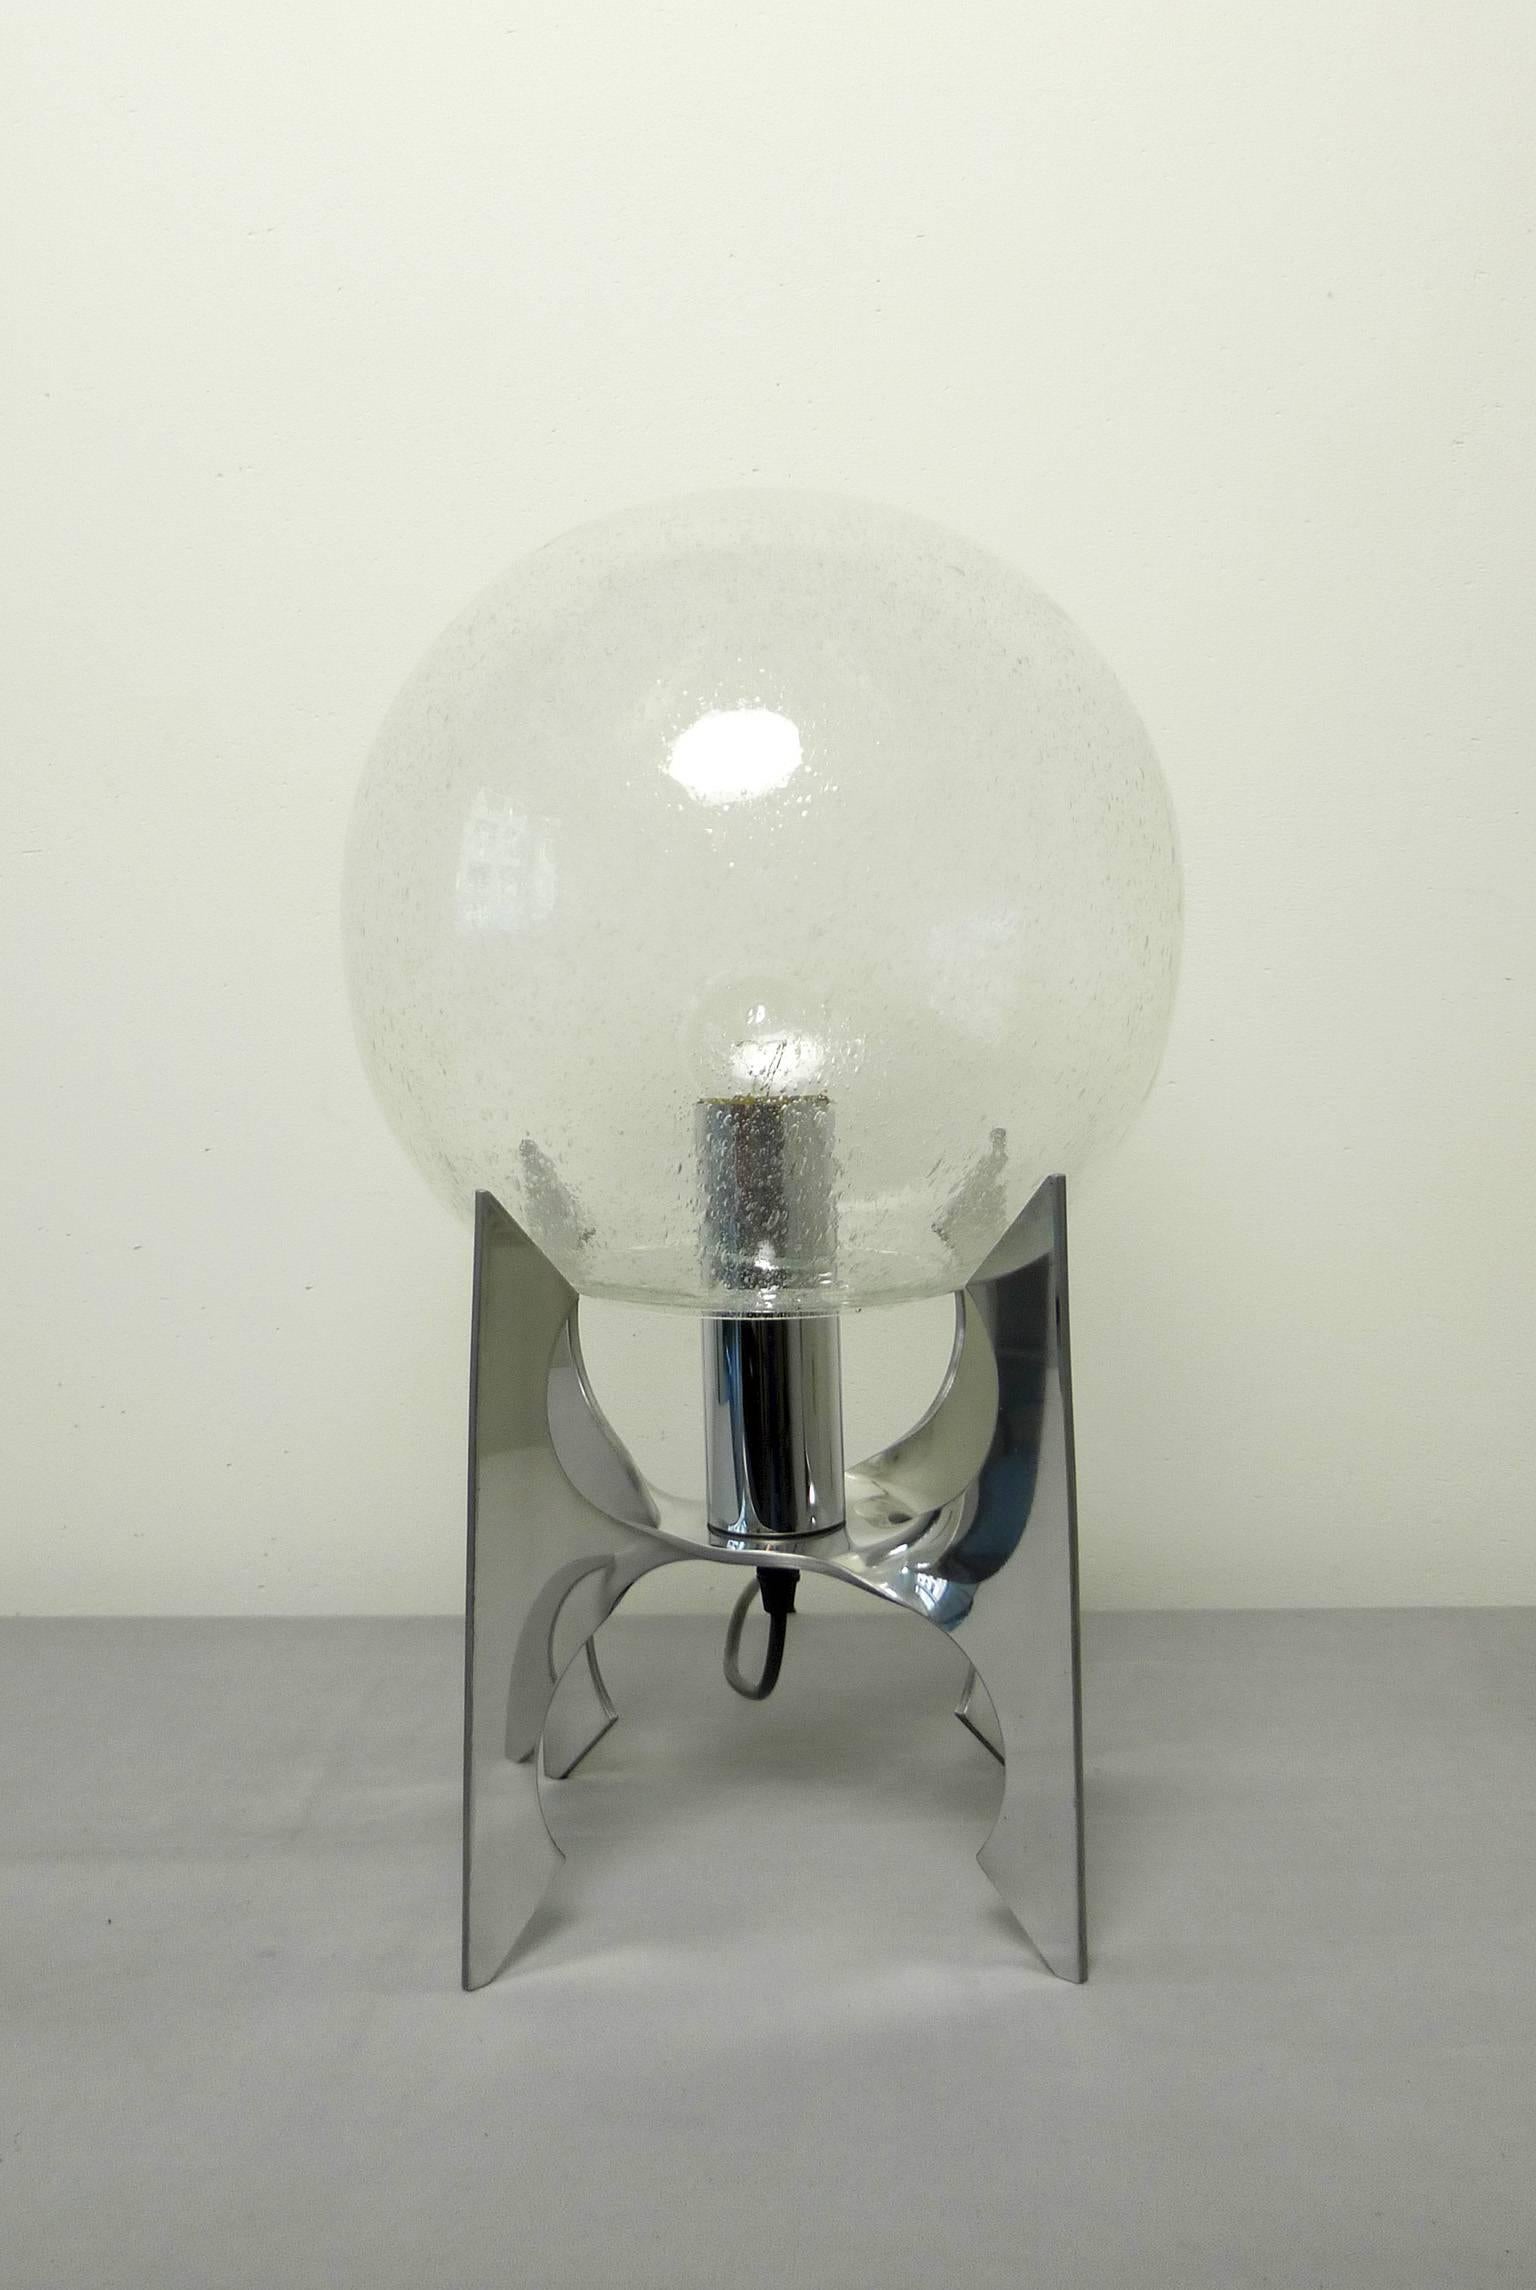 German space table lamp in the shape of the Apollo rocket from the 1970s. The polished aluminium base holds a large glass globe with air bubbles inside. These bubbles throw a Milky Way shadow to the wall.
This Space Age lamp has one E 27 bulb